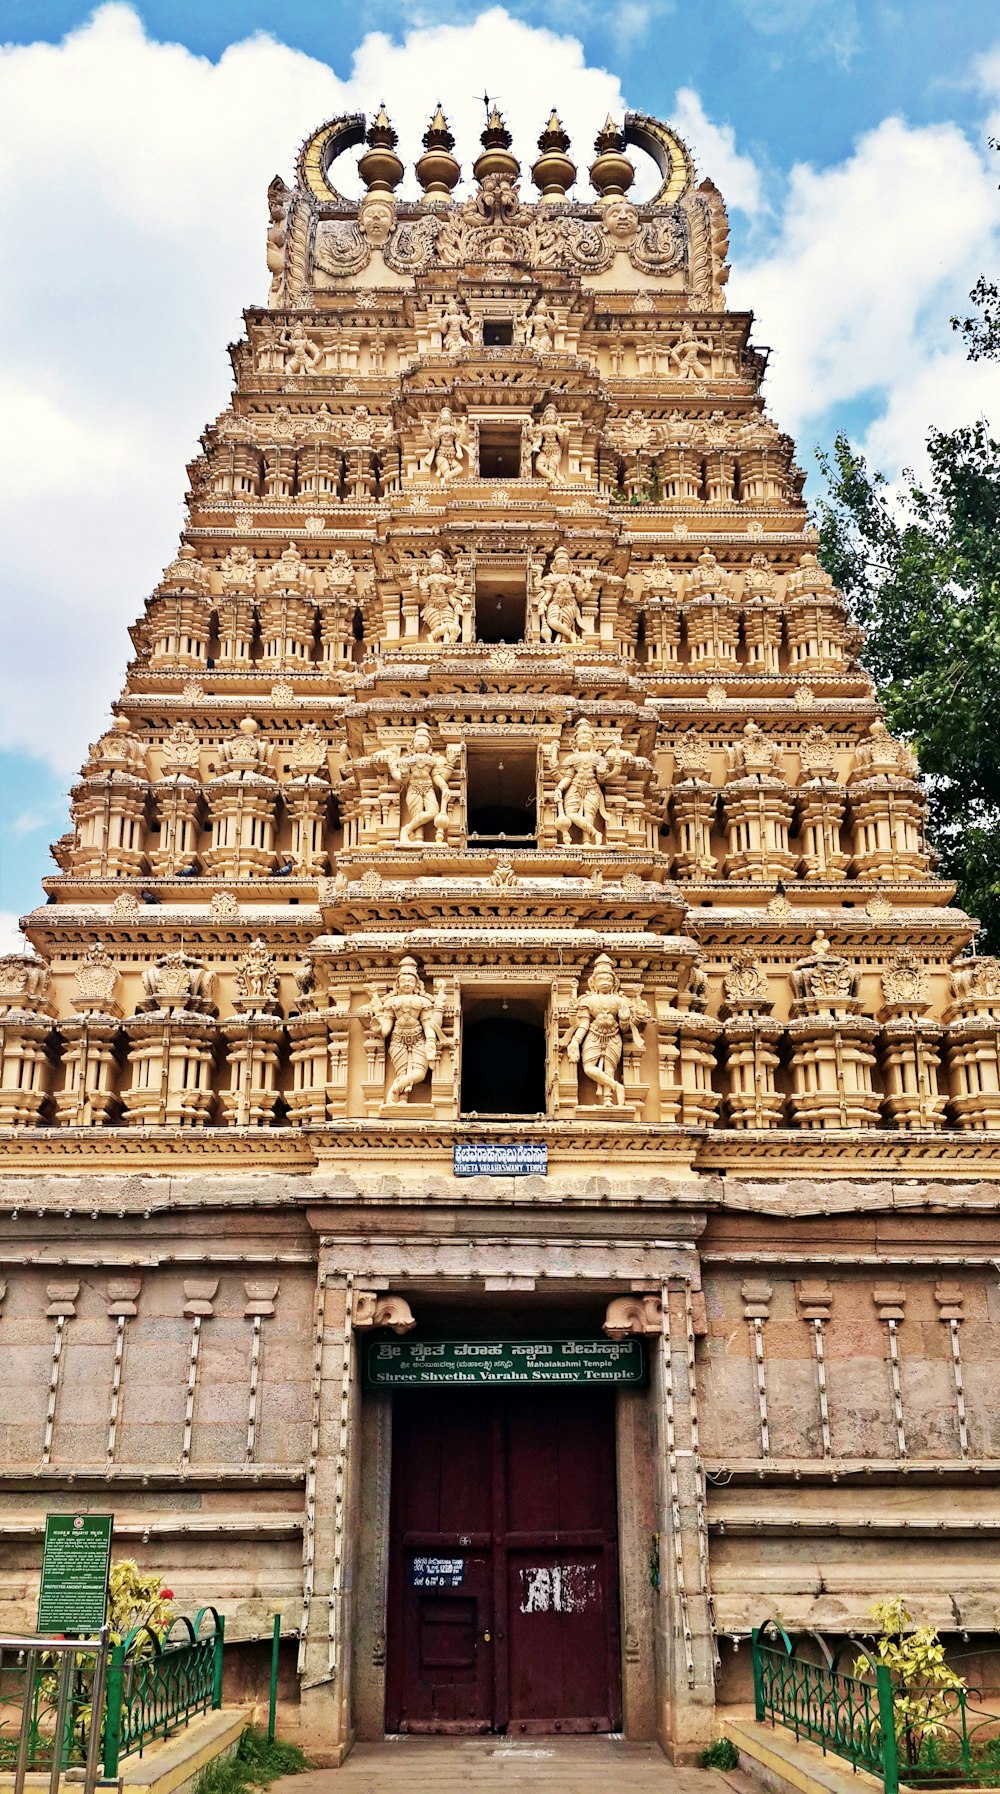 750+ Hindu Temple Pictures | Download Free Images on Unsplash